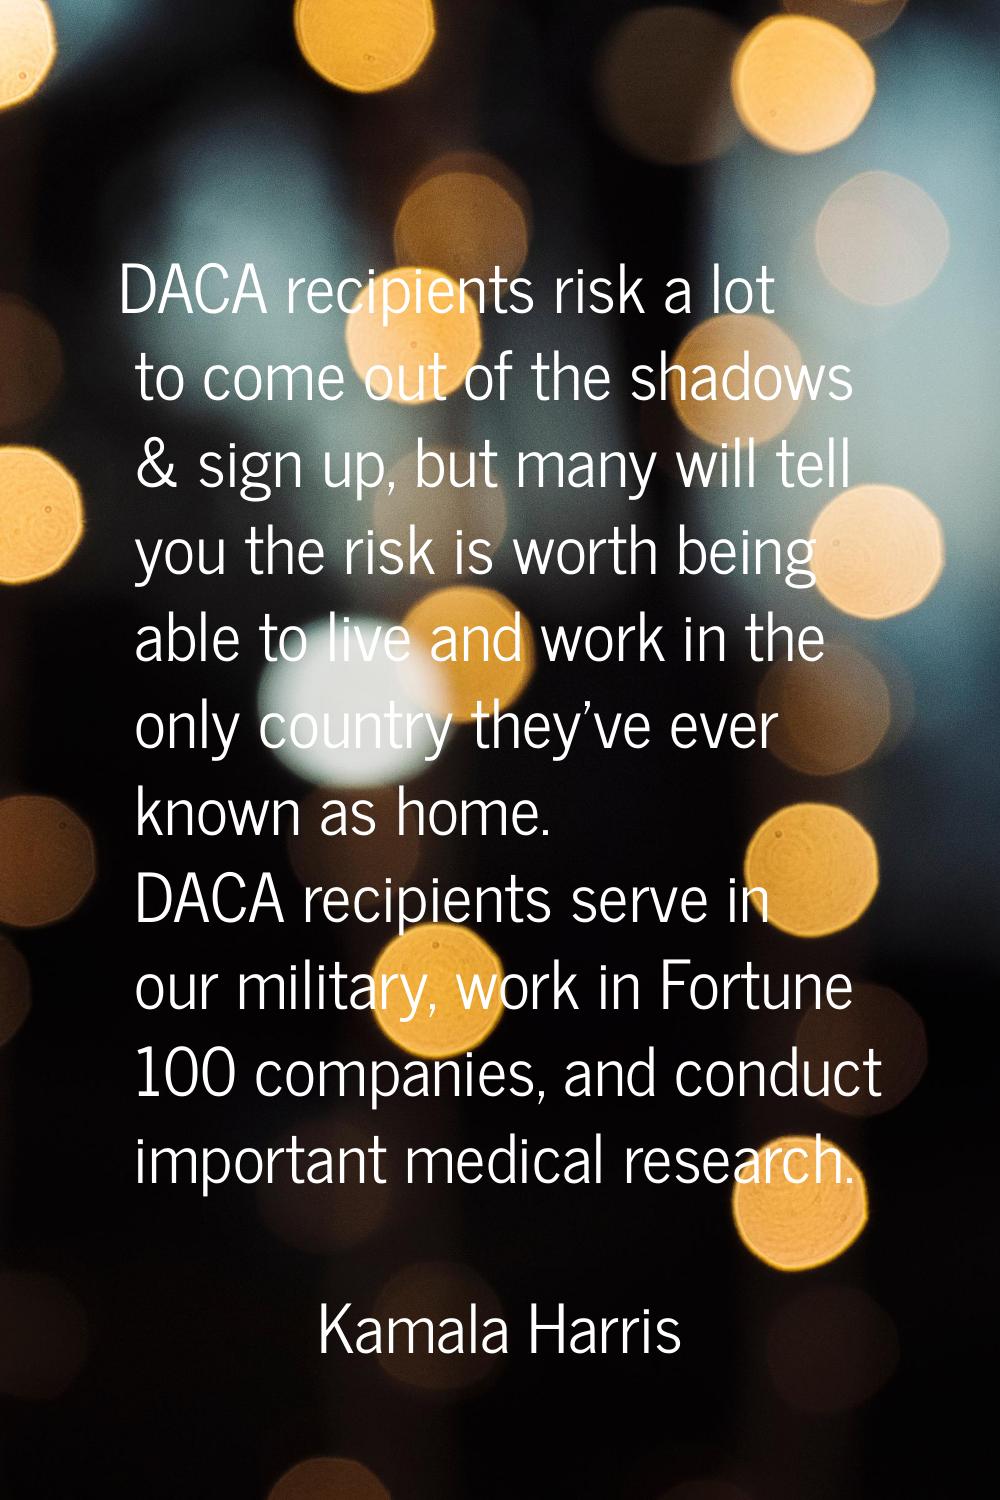 DACA recipients risk a lot to come out of the shadows & sign up, but many will tell you the risk is